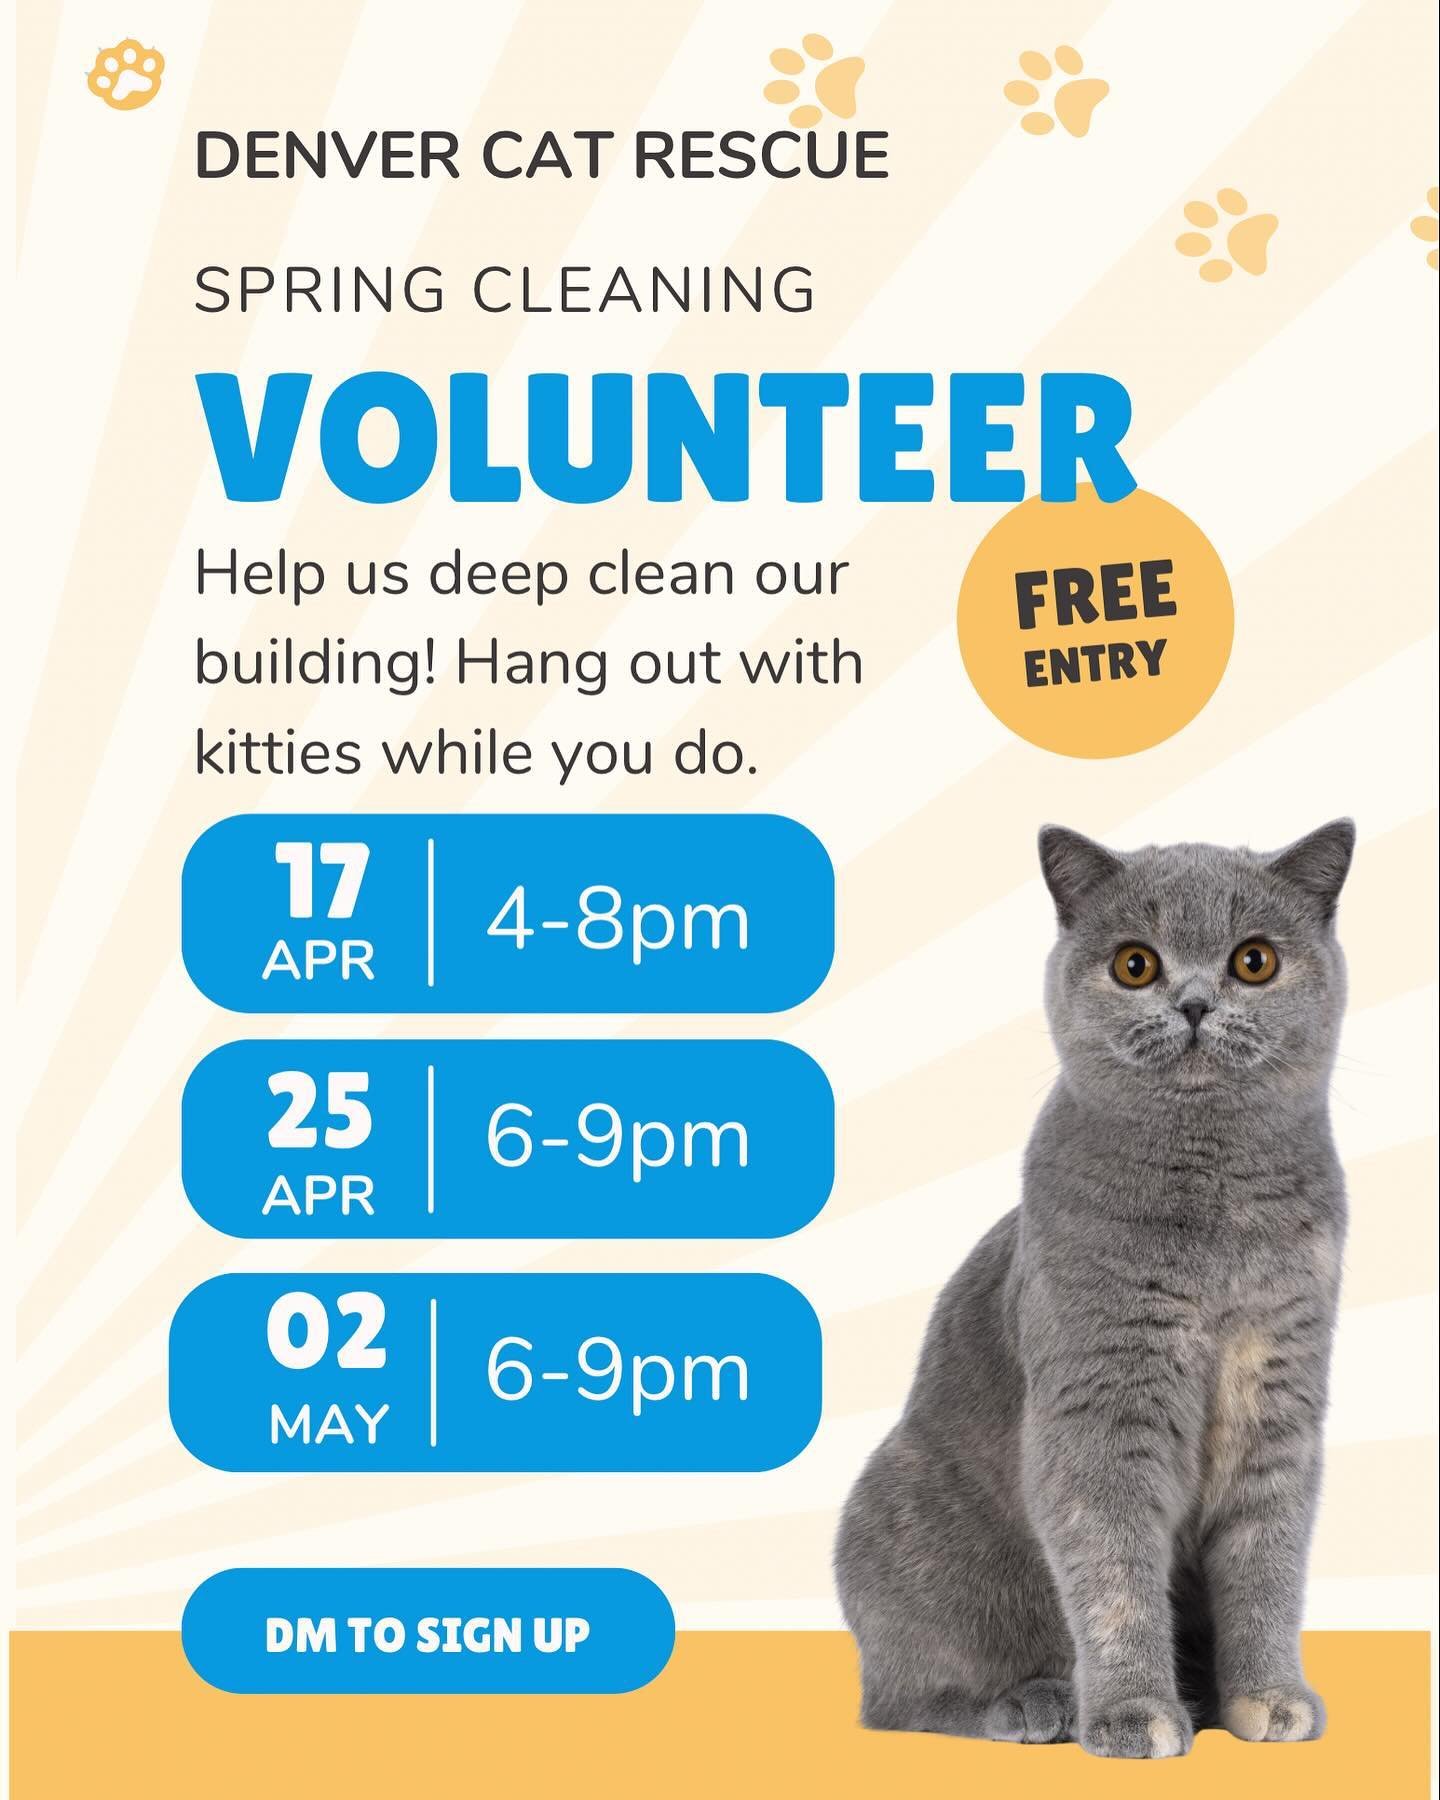 We don&rsquo;t often have opportunities to volunteer with the kitties at @denvercatco and mostly use our volunteers to assist with administrative work. If you have been interested in volunteering in person, now is your chance! DM to sign up 😻

We ar